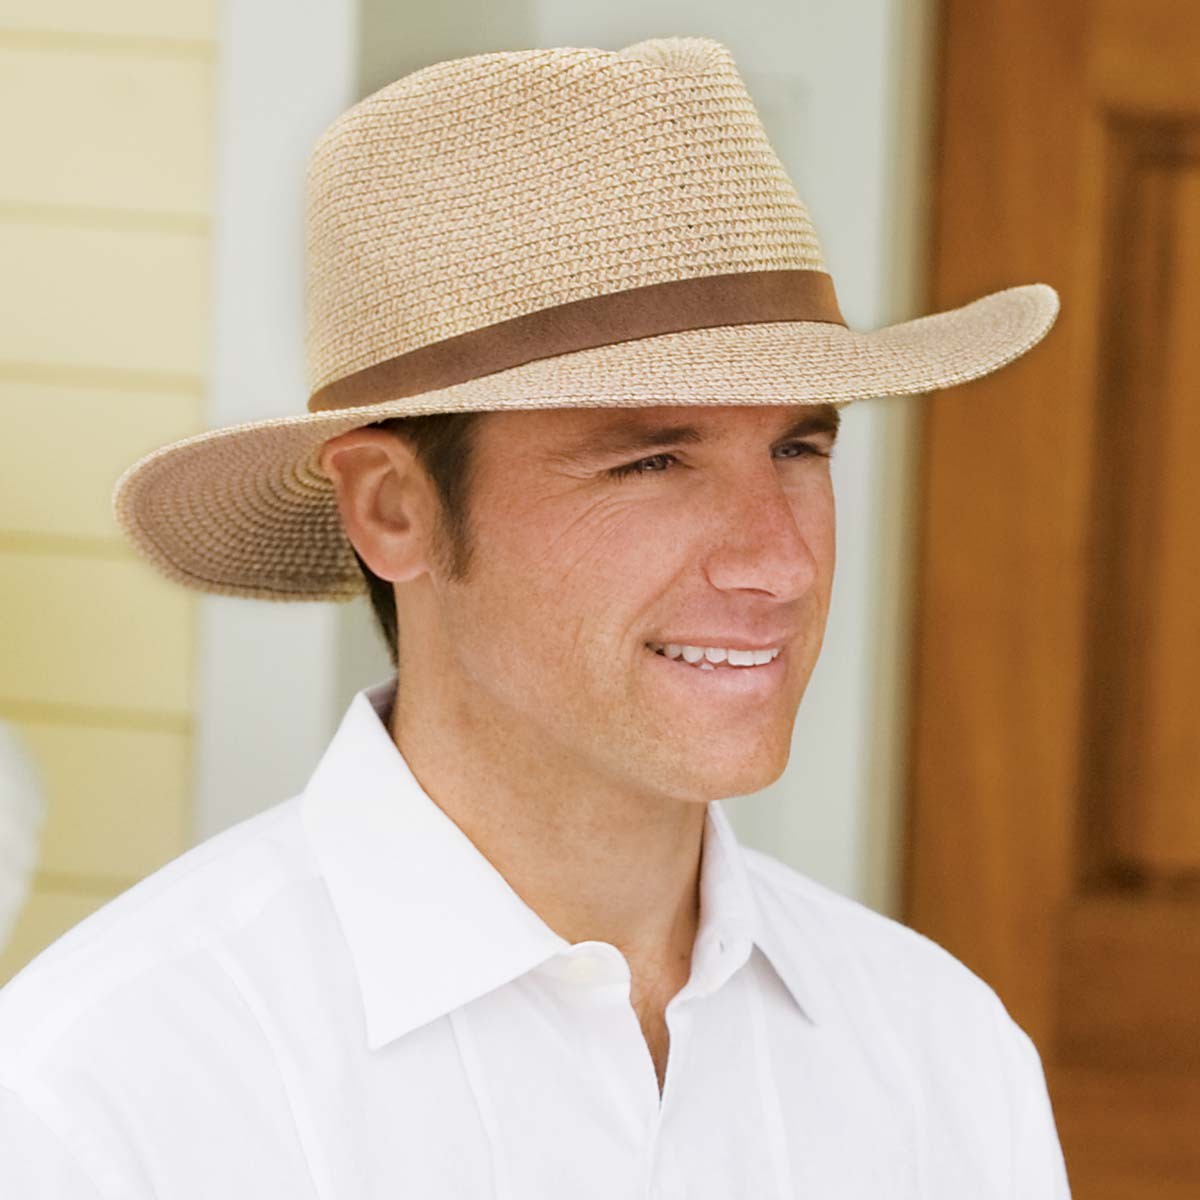 Mens Summer Hats Outfits for 2017